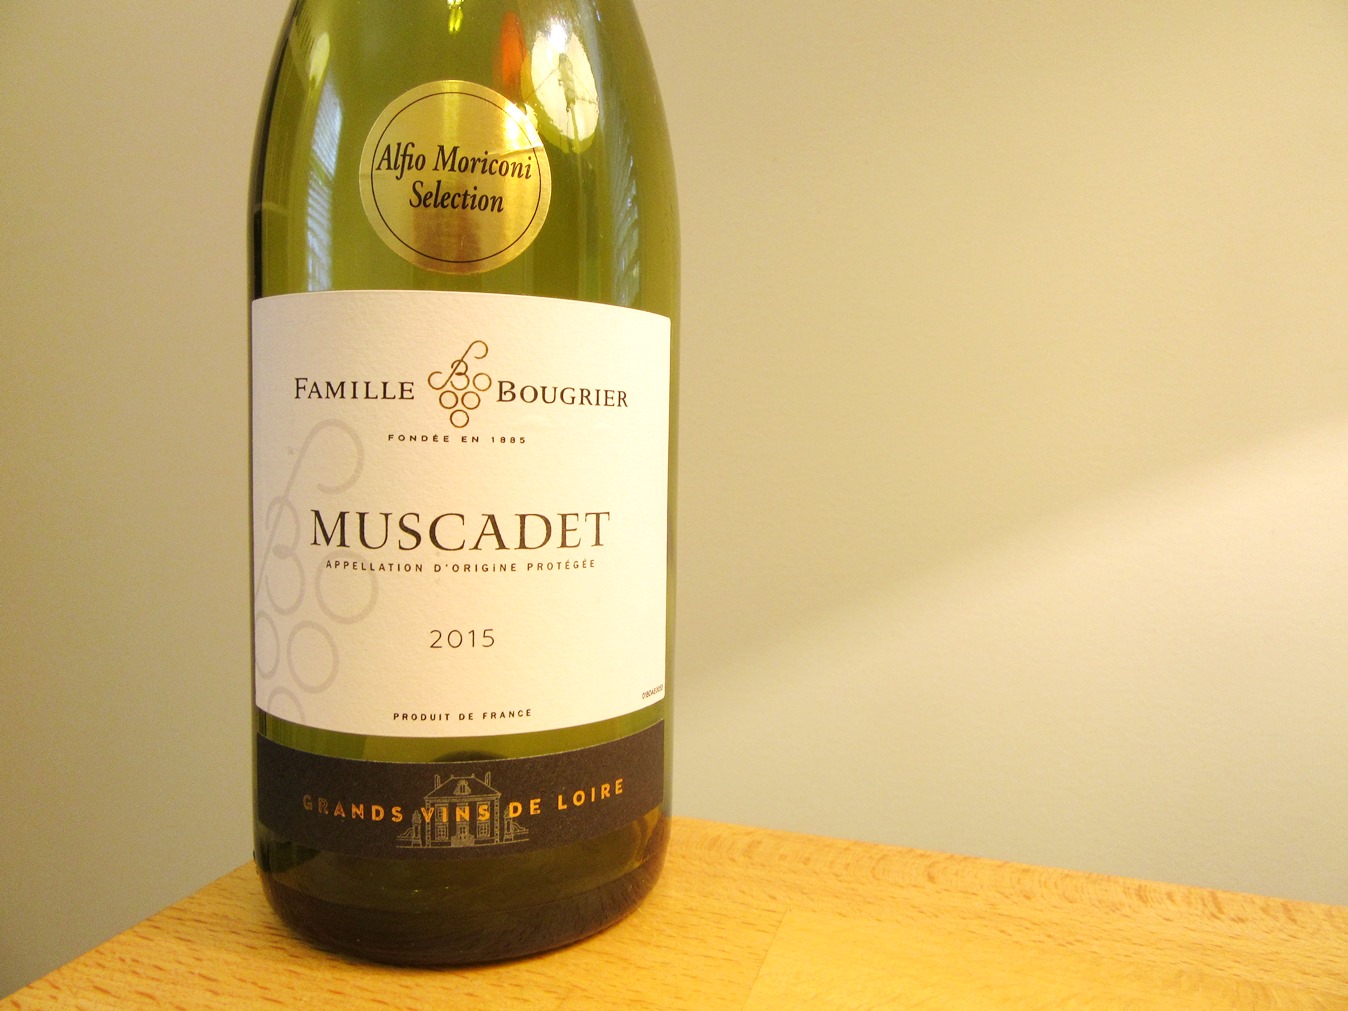 Photo Credit: Wine Casual, Famille Bougrier, Muscadet 2015, Loire, France